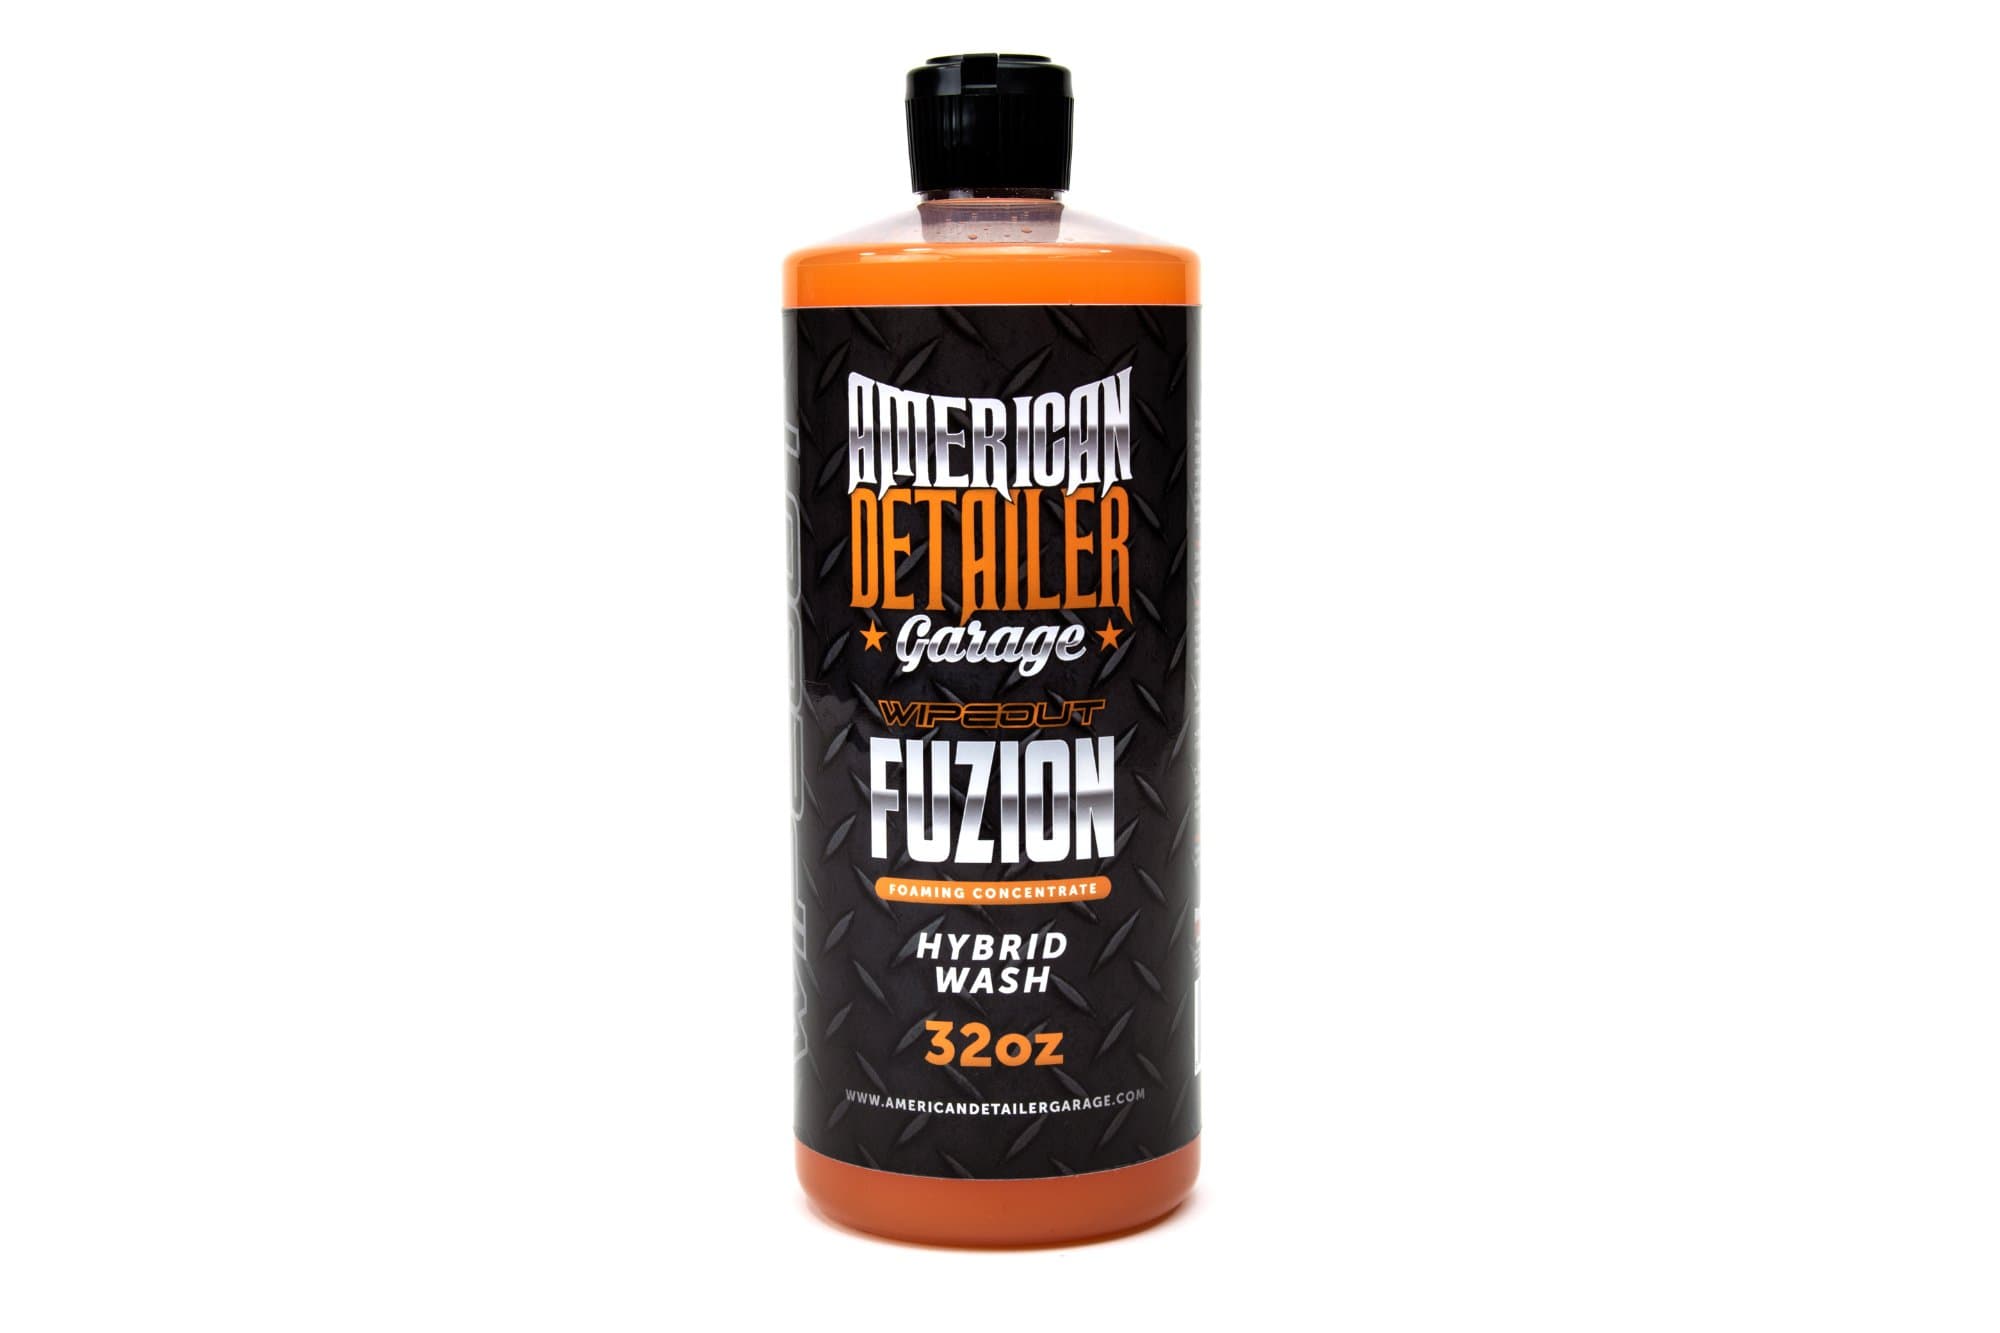 [FUZION] Hybrid Foaming Wash Concentrate